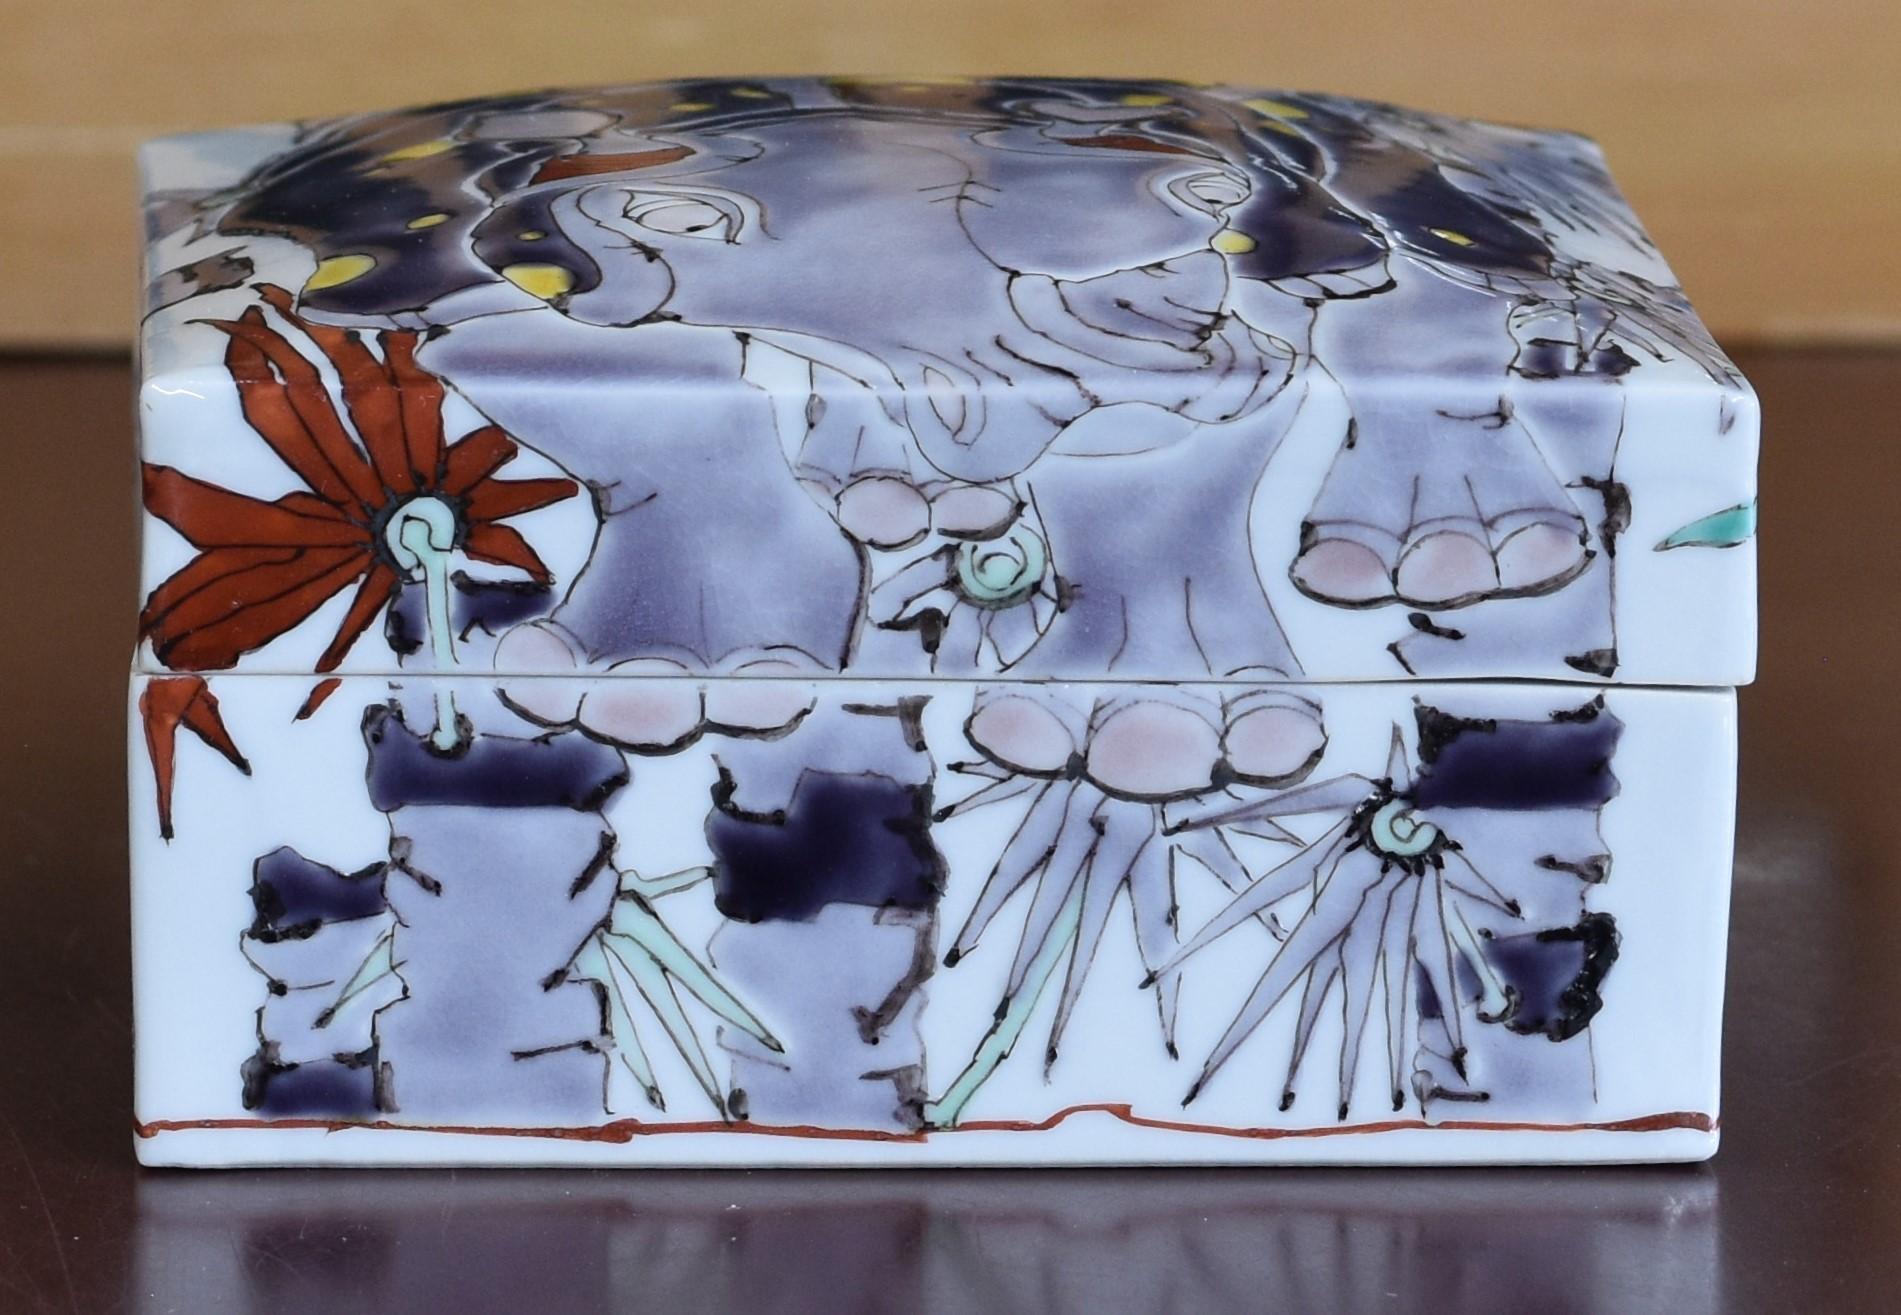 Exquisite Japanese contemporary museum-quality signed decorative porcelain box in an elegant square shape, stunningly gilded and hand painted in vivid hues of purple and blue, showcasing a unique interpretation of the rhinoceros by highly acclaimed